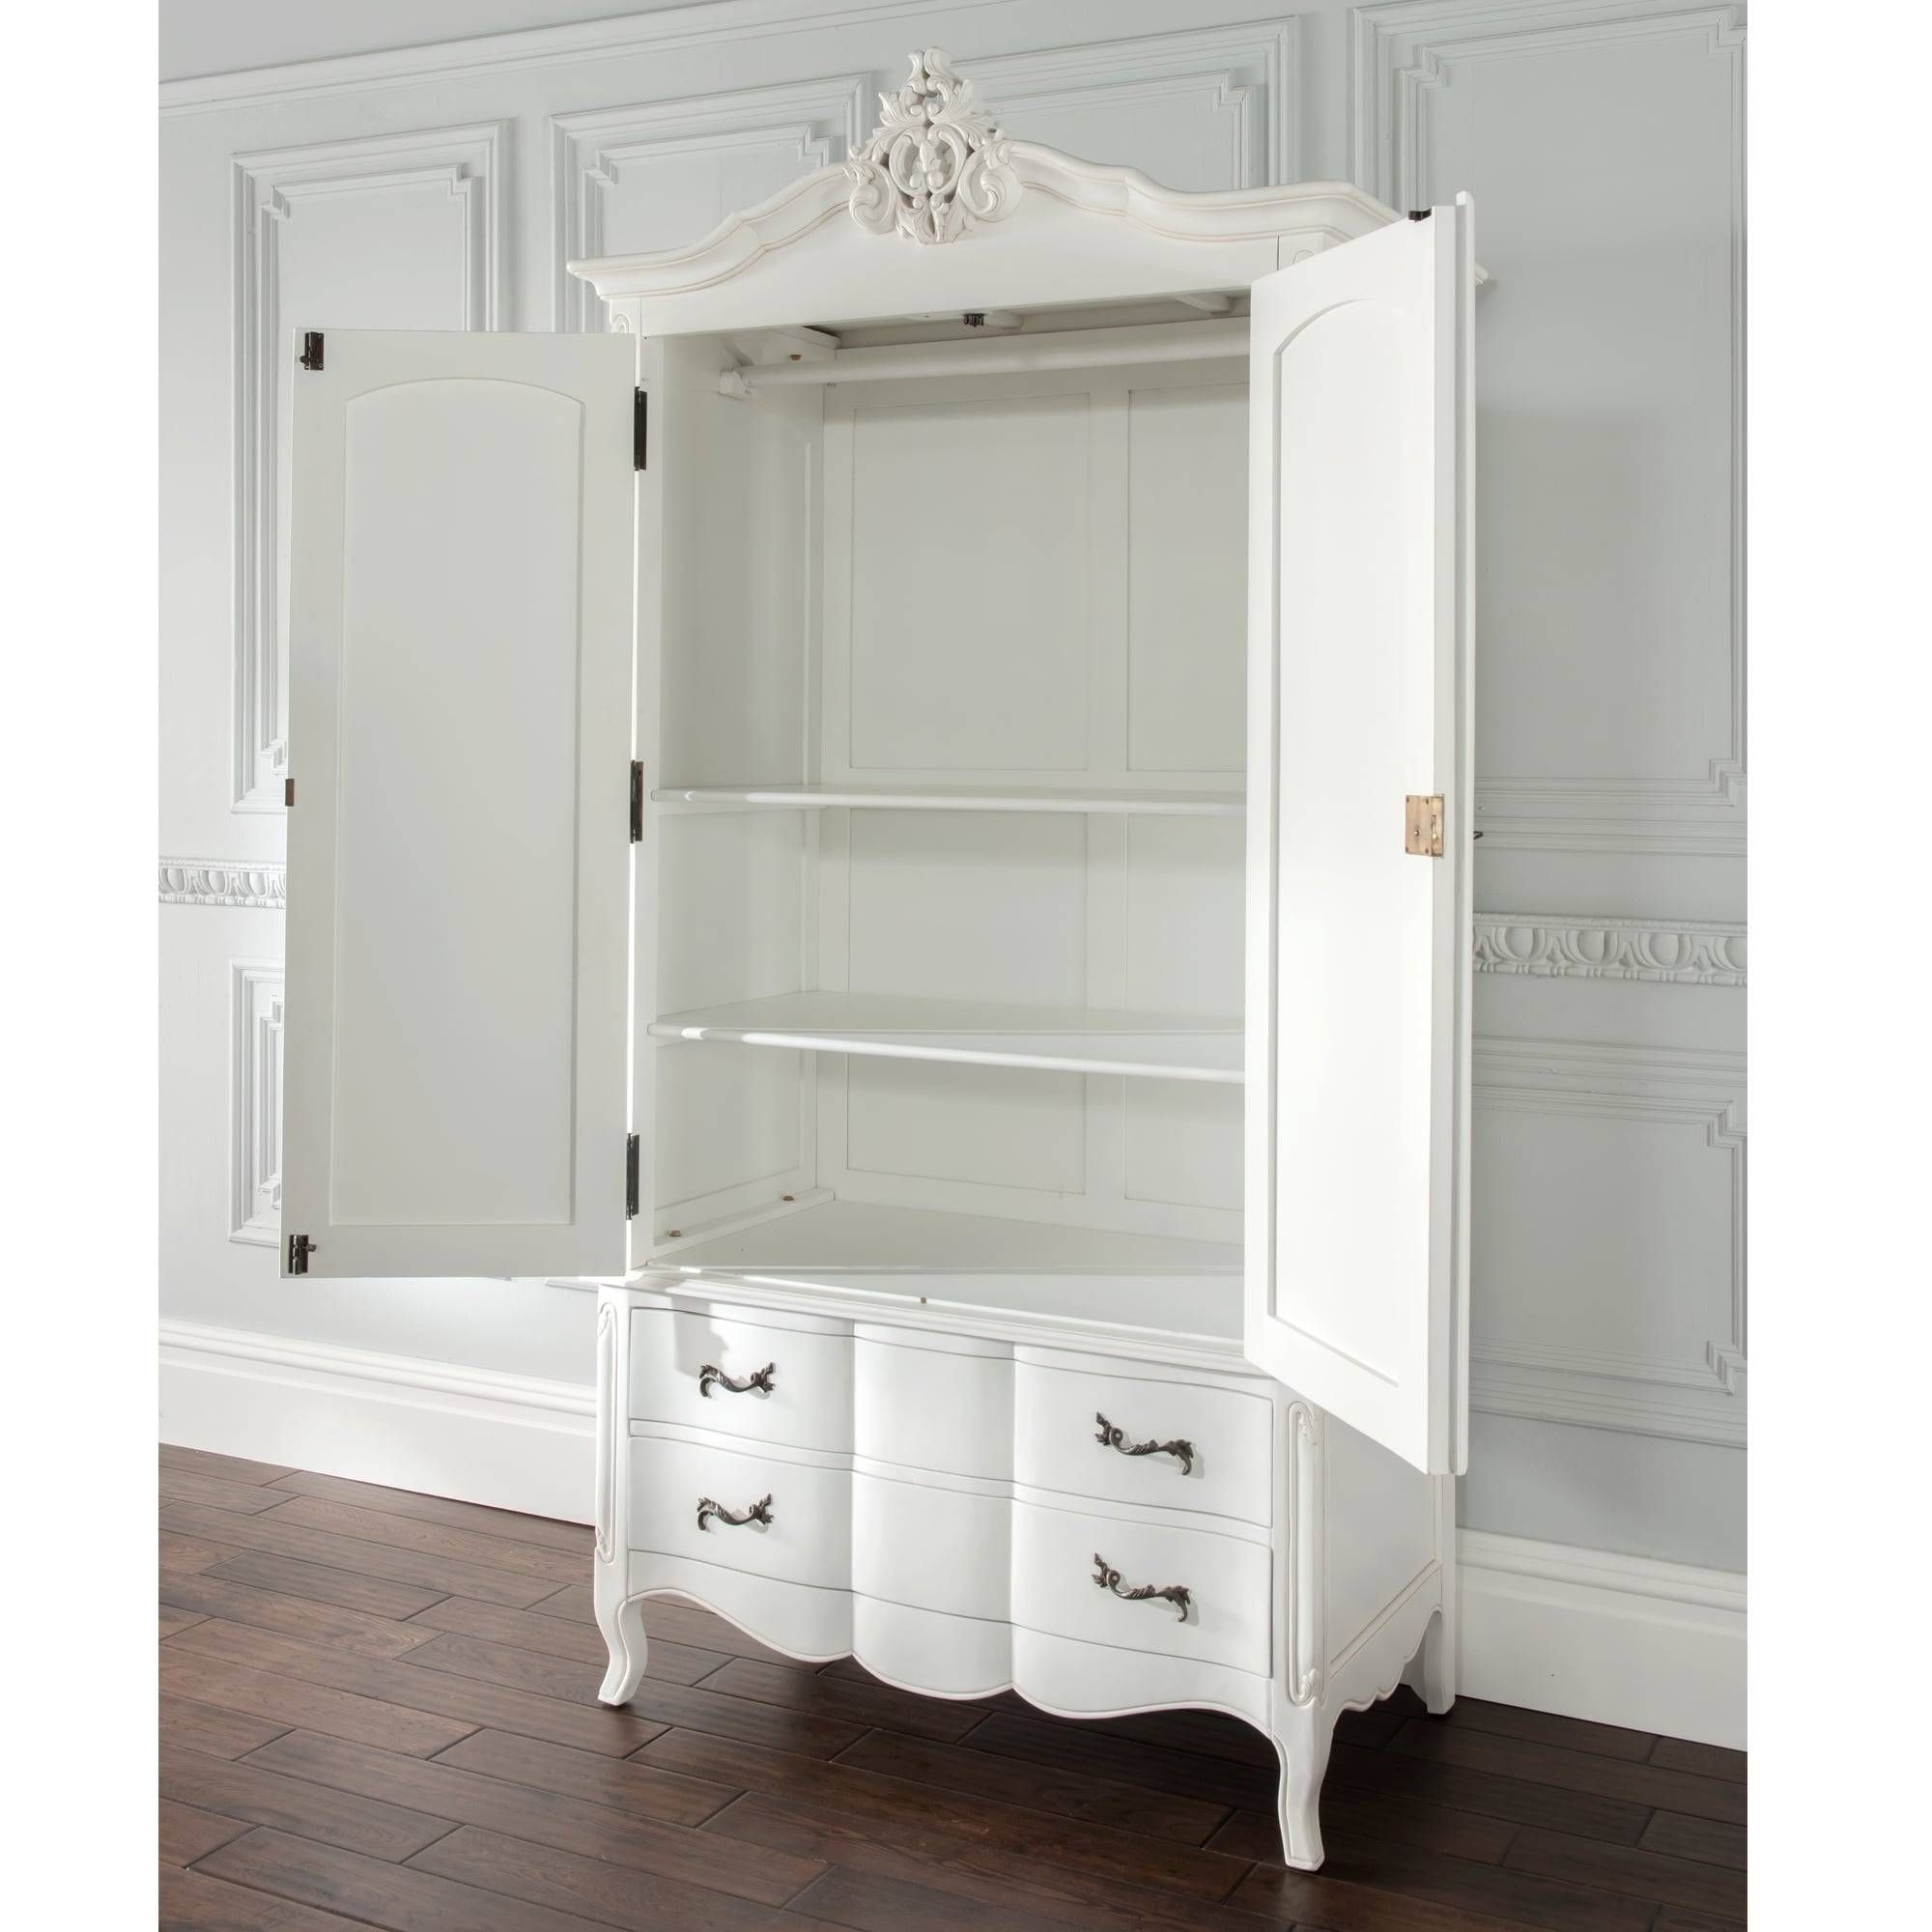 Estelle Antique French Style Wardrobe | French Style Furniture Inside French Style Wardrobes (View 12 of 15)